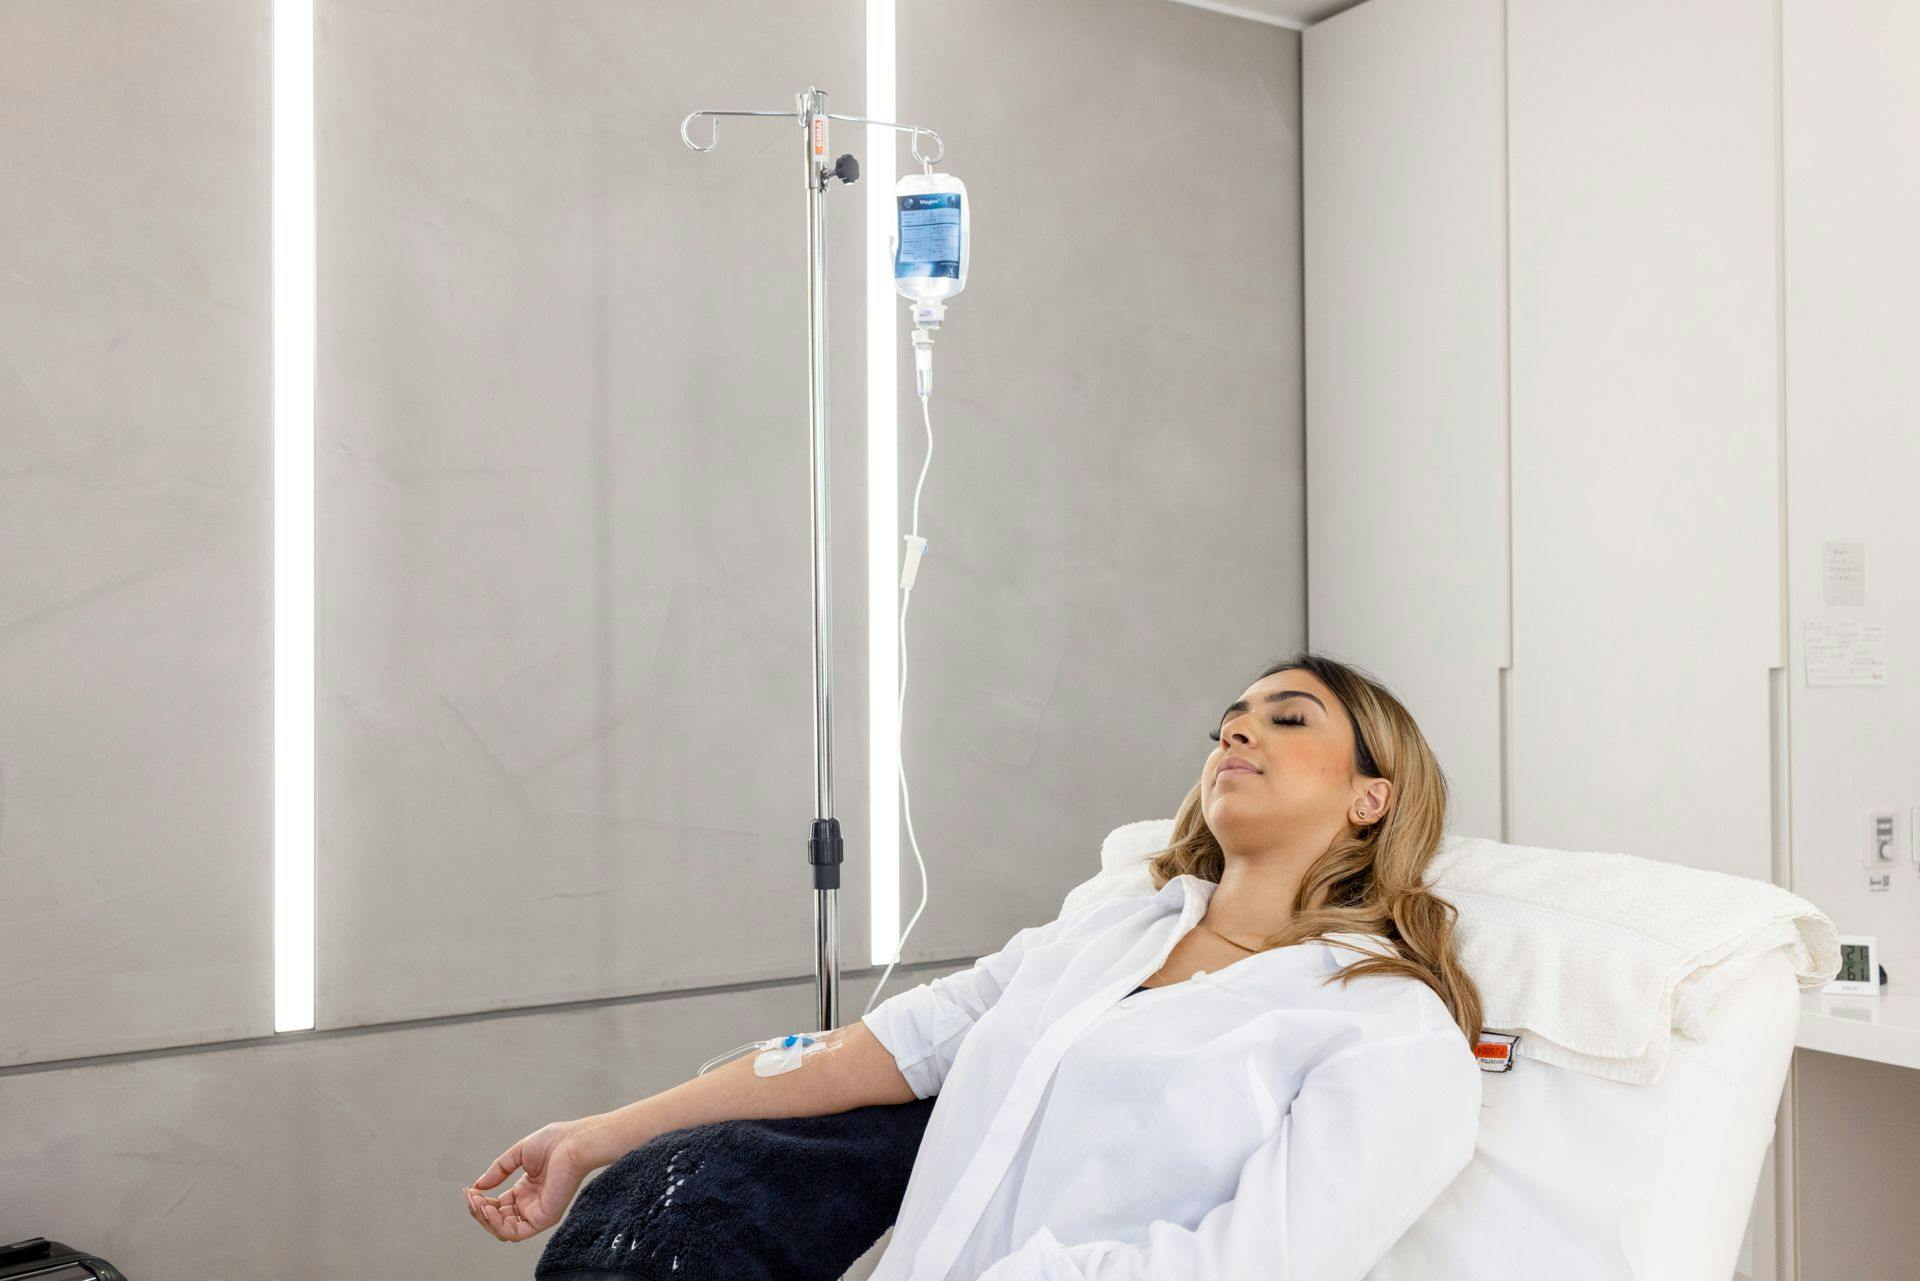 IV Drip Therapy - Relax, recharge, renew at REVIV 